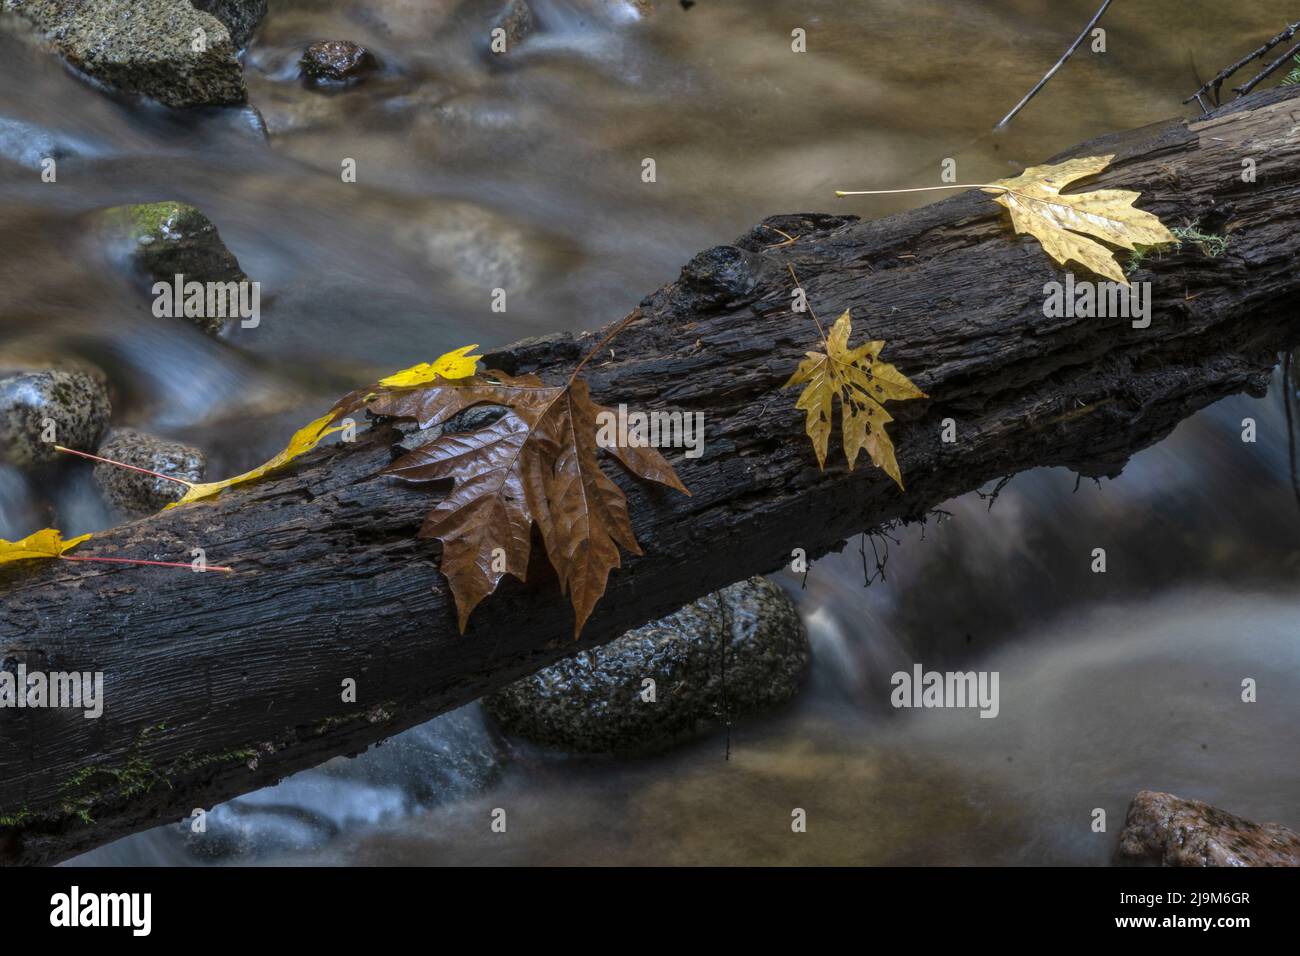 Long exposure of water running below a branch crossing a creek in the Autumn, featuring different stages of a big leaf maple tree Stock Photo